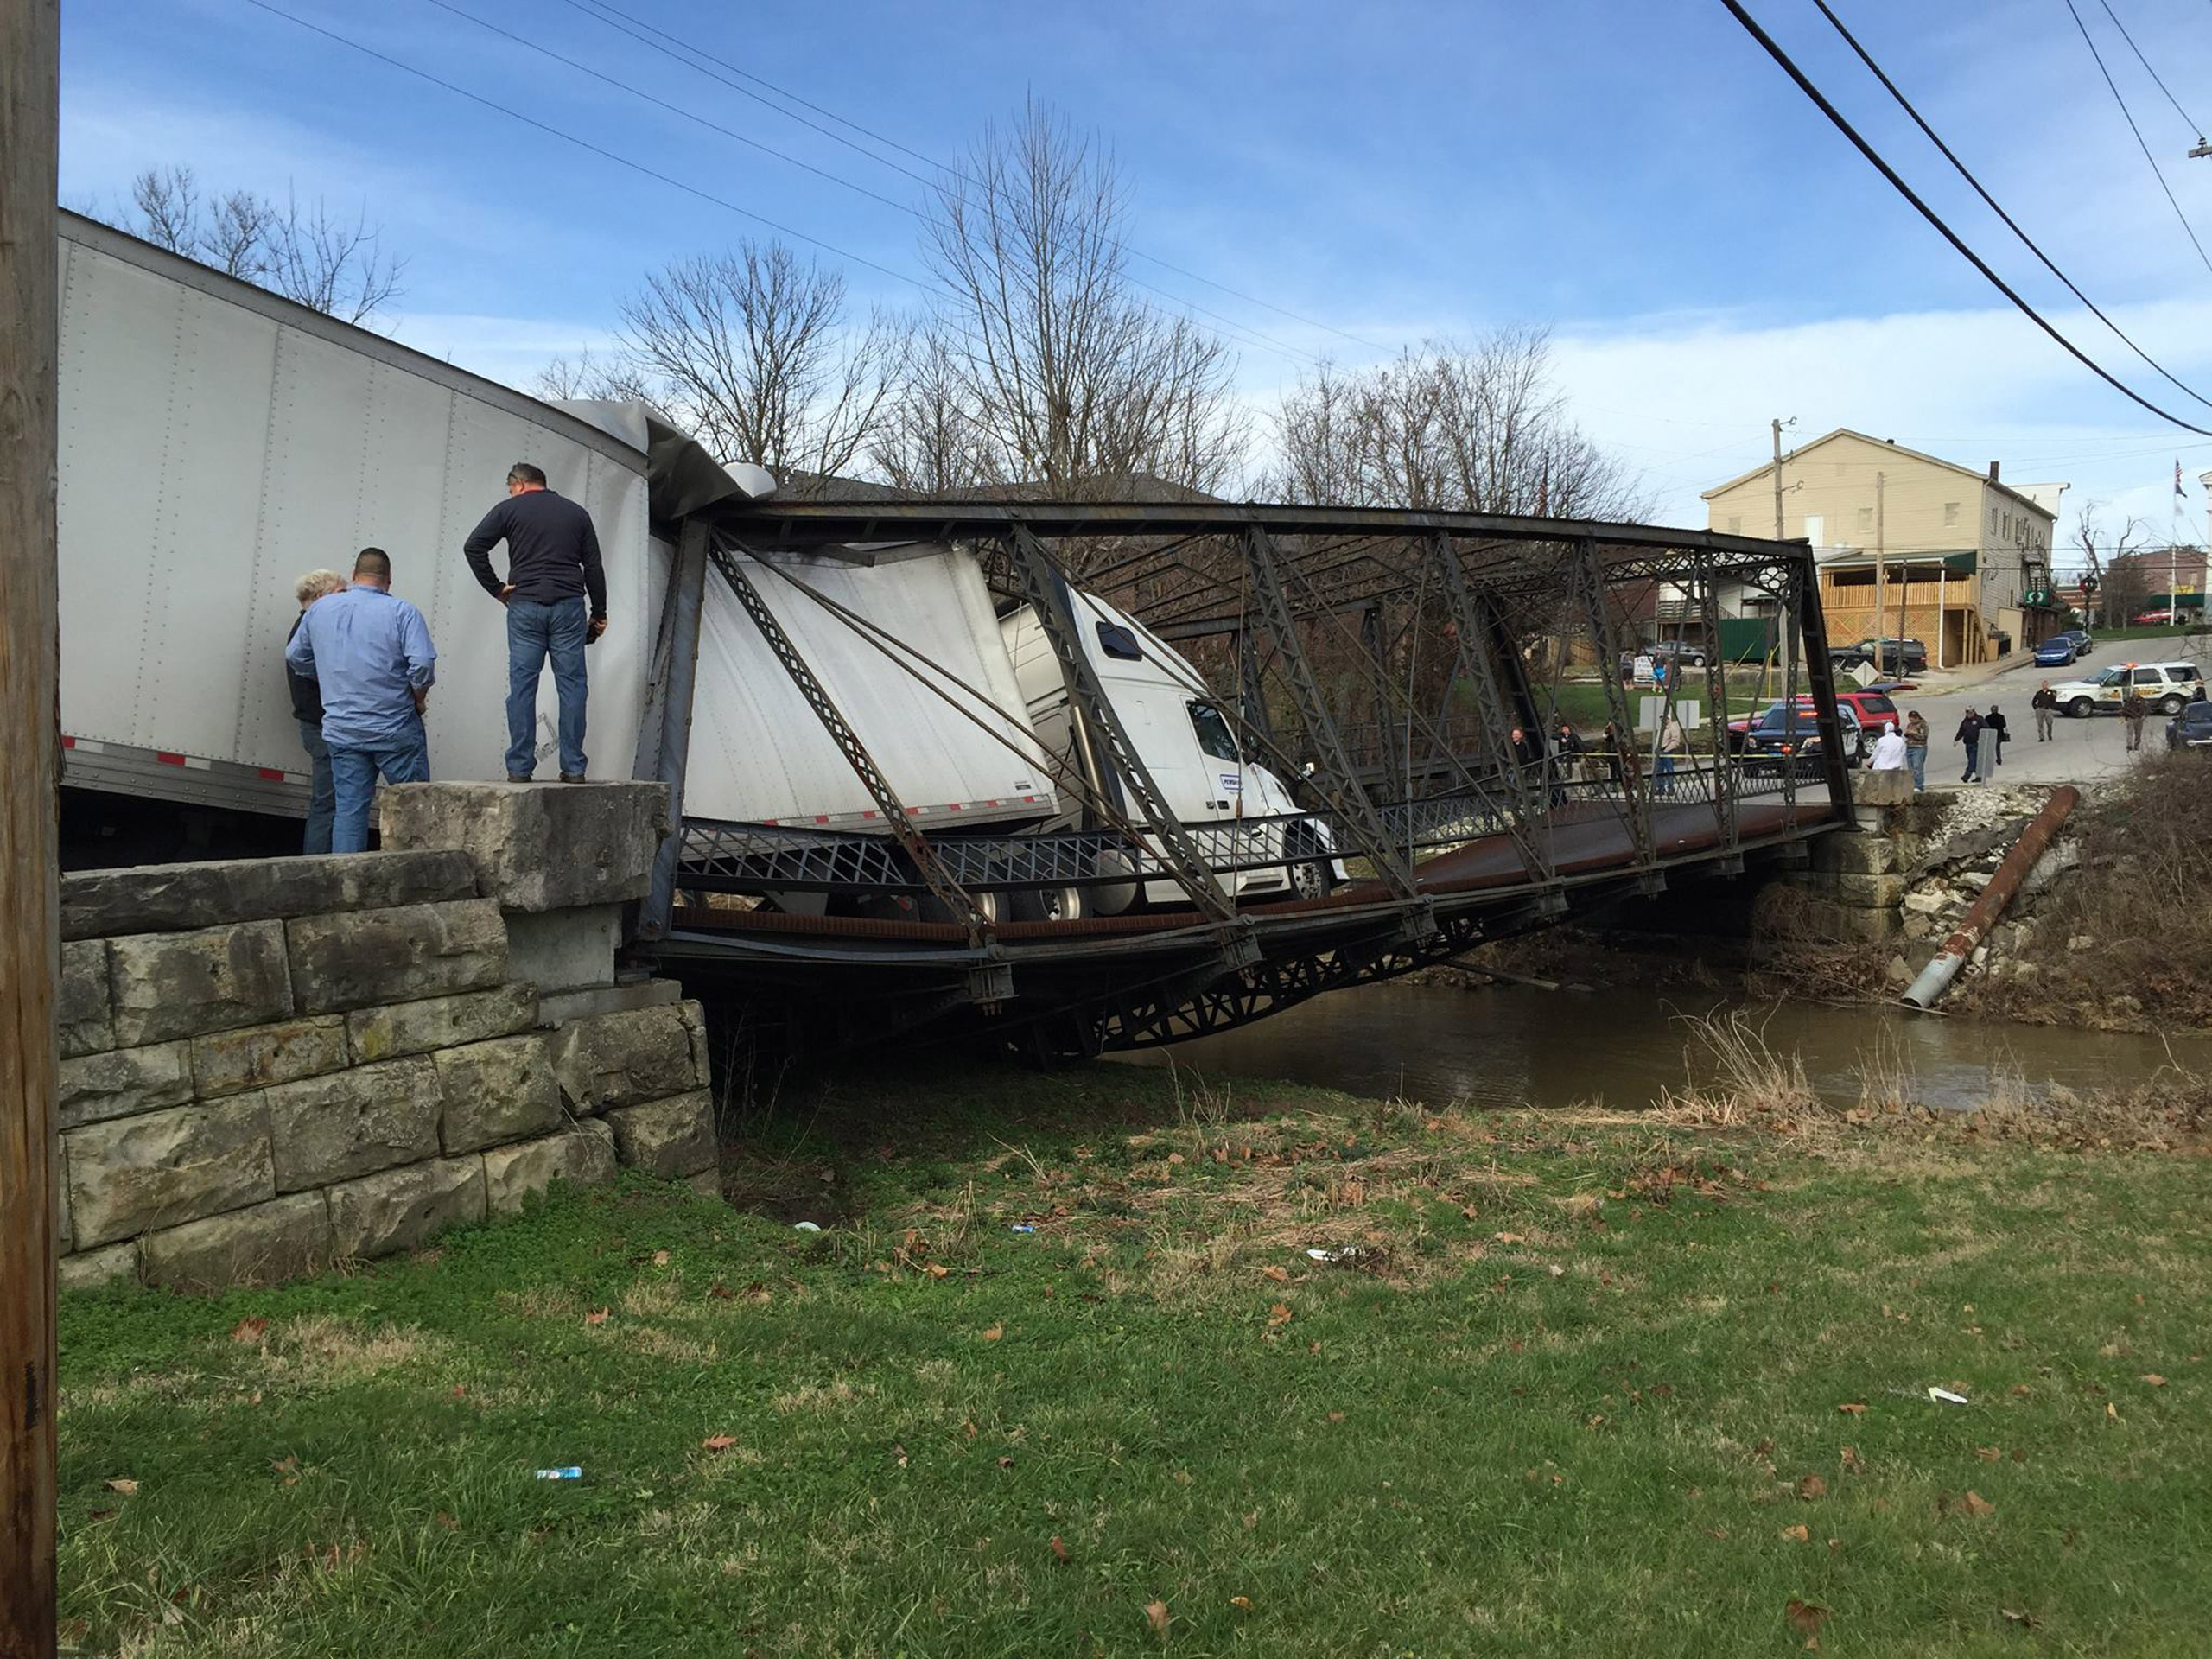 A bridge collapsed under a semitrailer weighing close to 30 tons that tried to cross it in Paoli, Ind., on Christmas. (Orange County Indiana Law Enforcement)